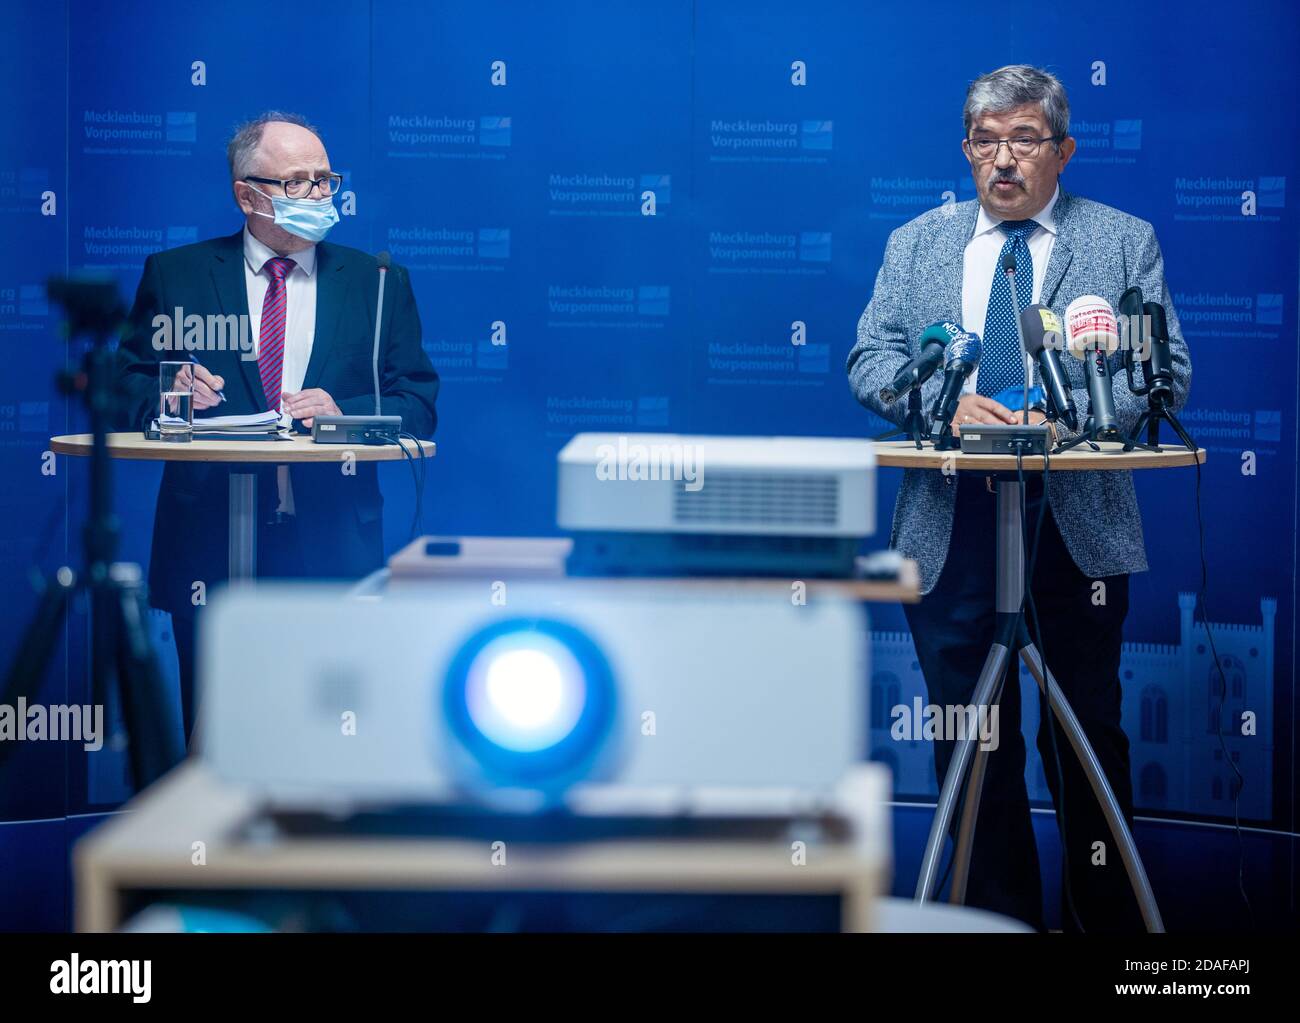 Schwerin, Germany. 12th Nov, 2020. Lorenz Caffier (CDU, r), the Minister of the Interior of Mecklenburg-Western Pomerania, and Reinhard Müller, Head of the Department for the Protection of the Constitution, present the 2019 Report on the Protection of the Constitution at a press conference. The number of left and right-wing extremist crimes in Mecklenburg-Western Pomerania has increased in the past year. Credit: Jens Büttner/dpa-Zentralbild/dpa/Alamy Live News Stock Photo